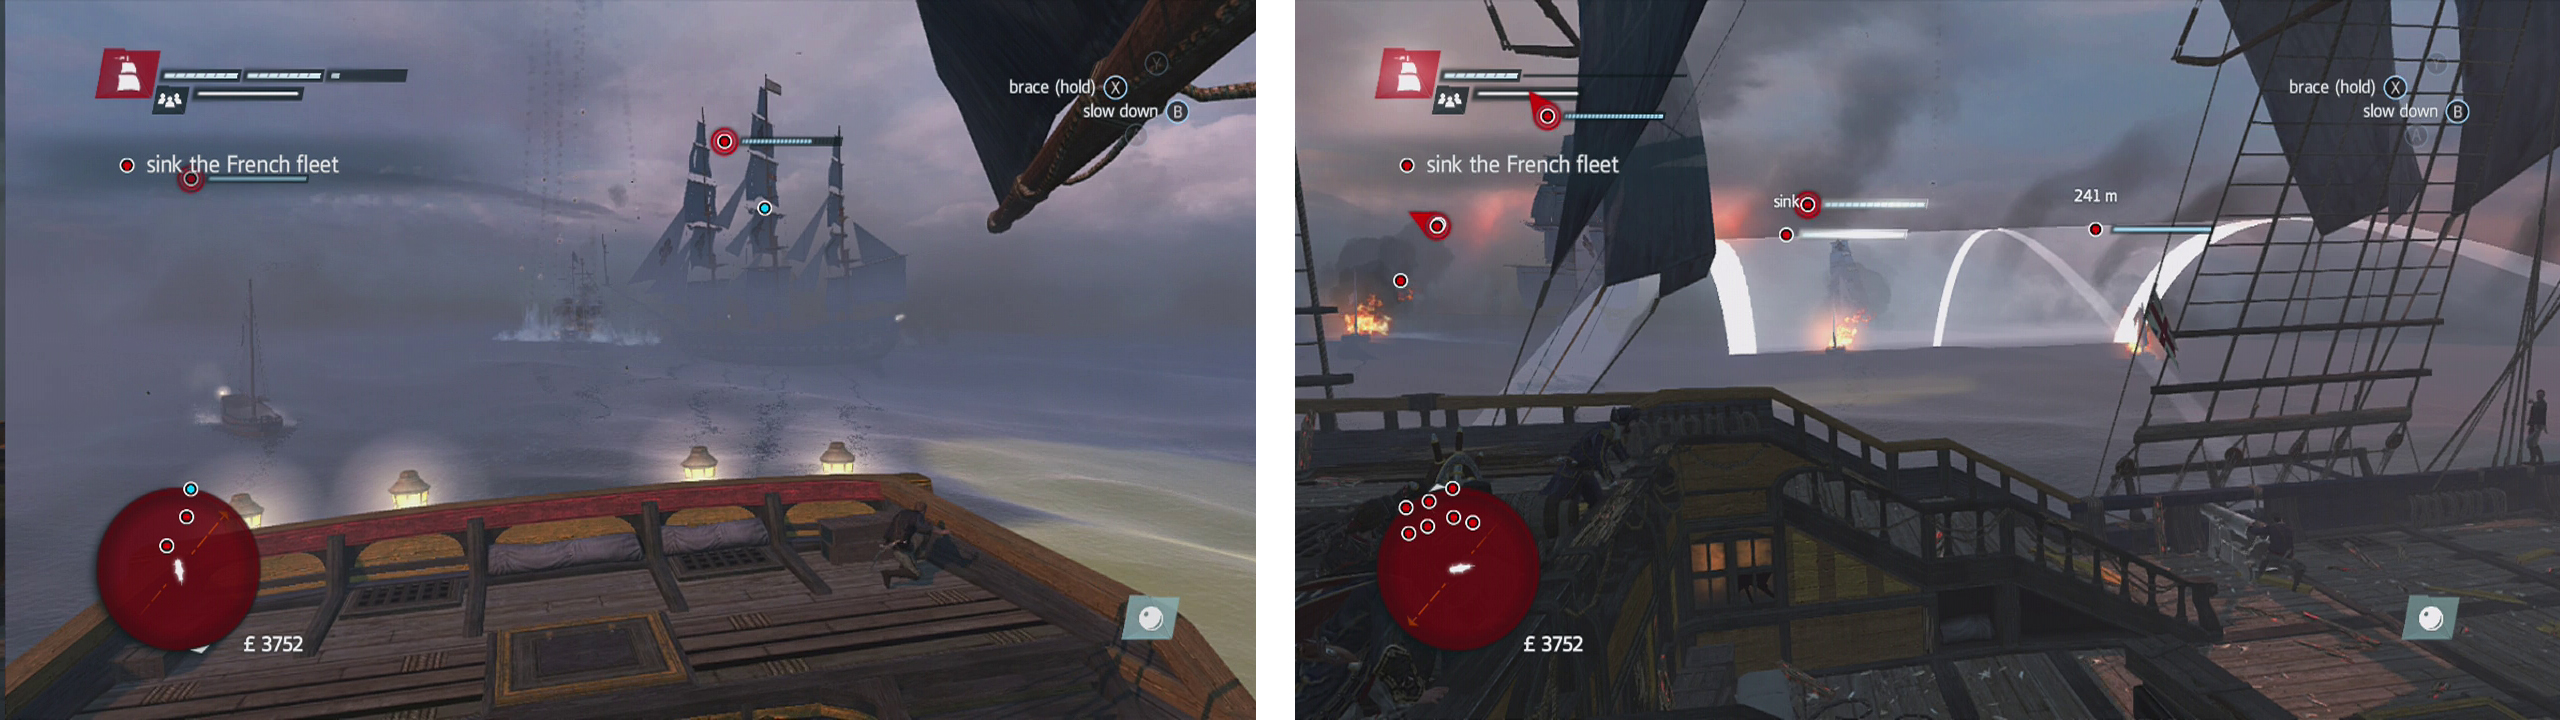 Keep an eye out behind you as gunships are fast and will sneak up on you (left). Be sure to focus on the fireships as a priority when they appear (right).